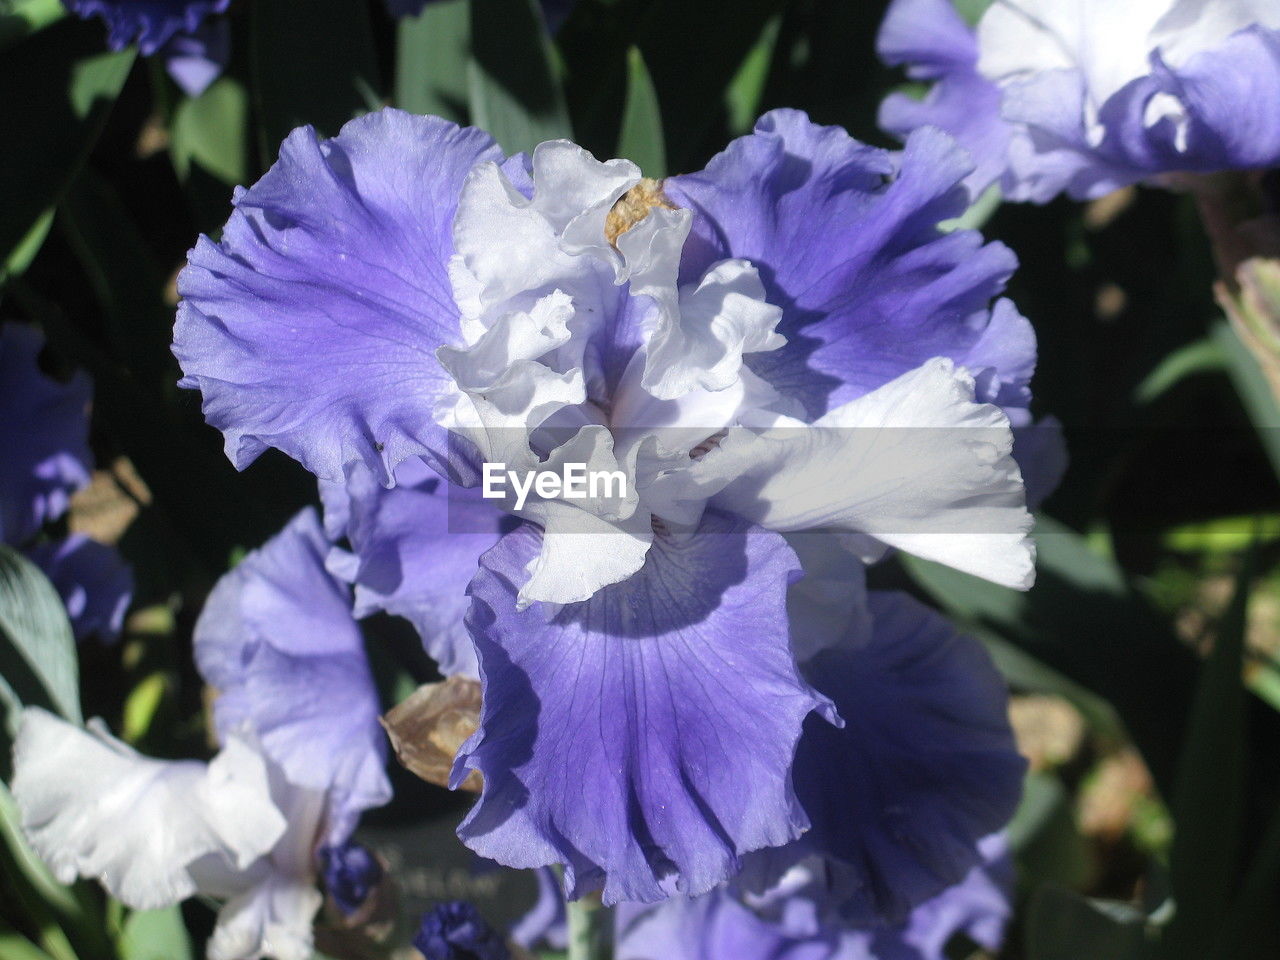 flower, flowering plant, plant, freshness, purple, beauty in nature, petal, close-up, fragility, growth, inflorescence, flower head, nature, iris, human eye, focus on foreground, blossom, springtime, botany, outdoors, day, sunlight